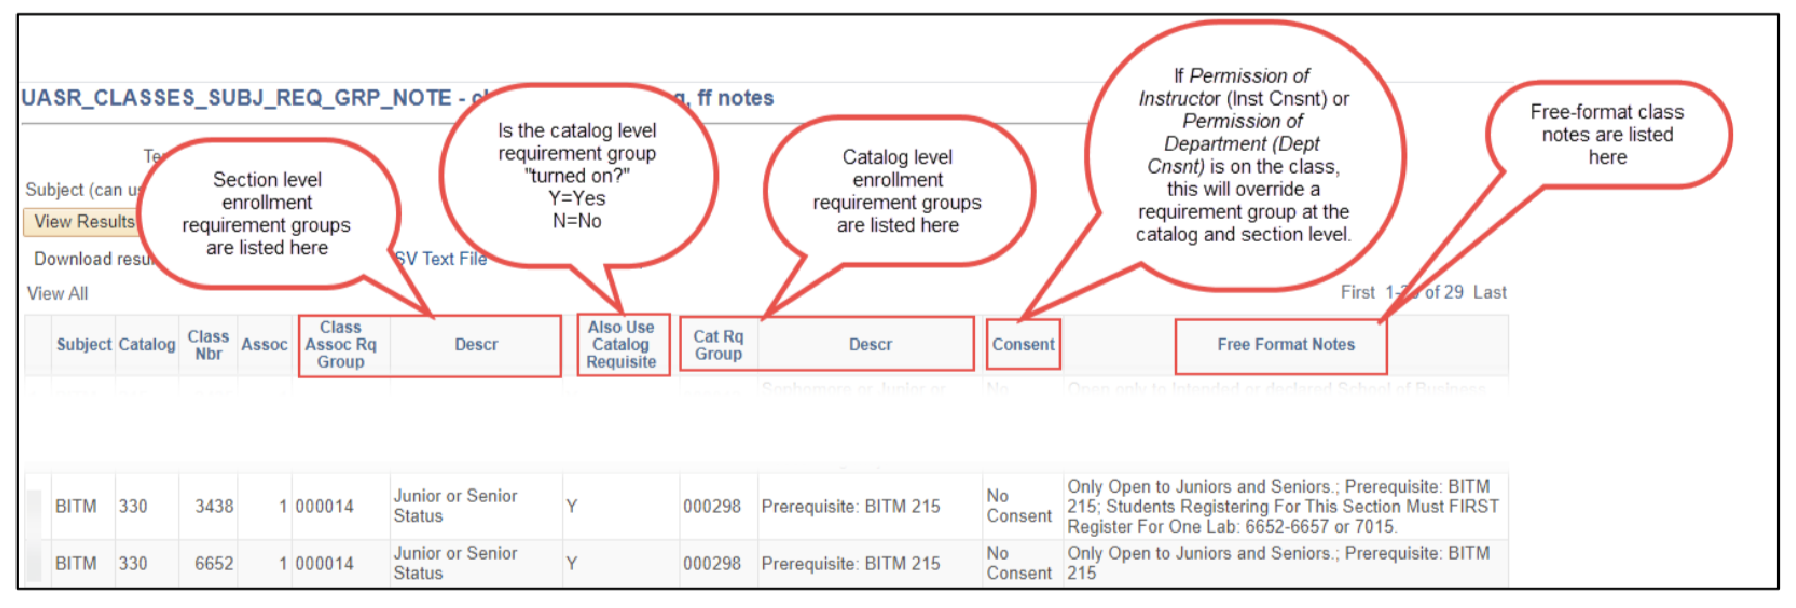 A screenshot of the PeopleSoft page showing how read an enrollment requirement groups query, as described above.